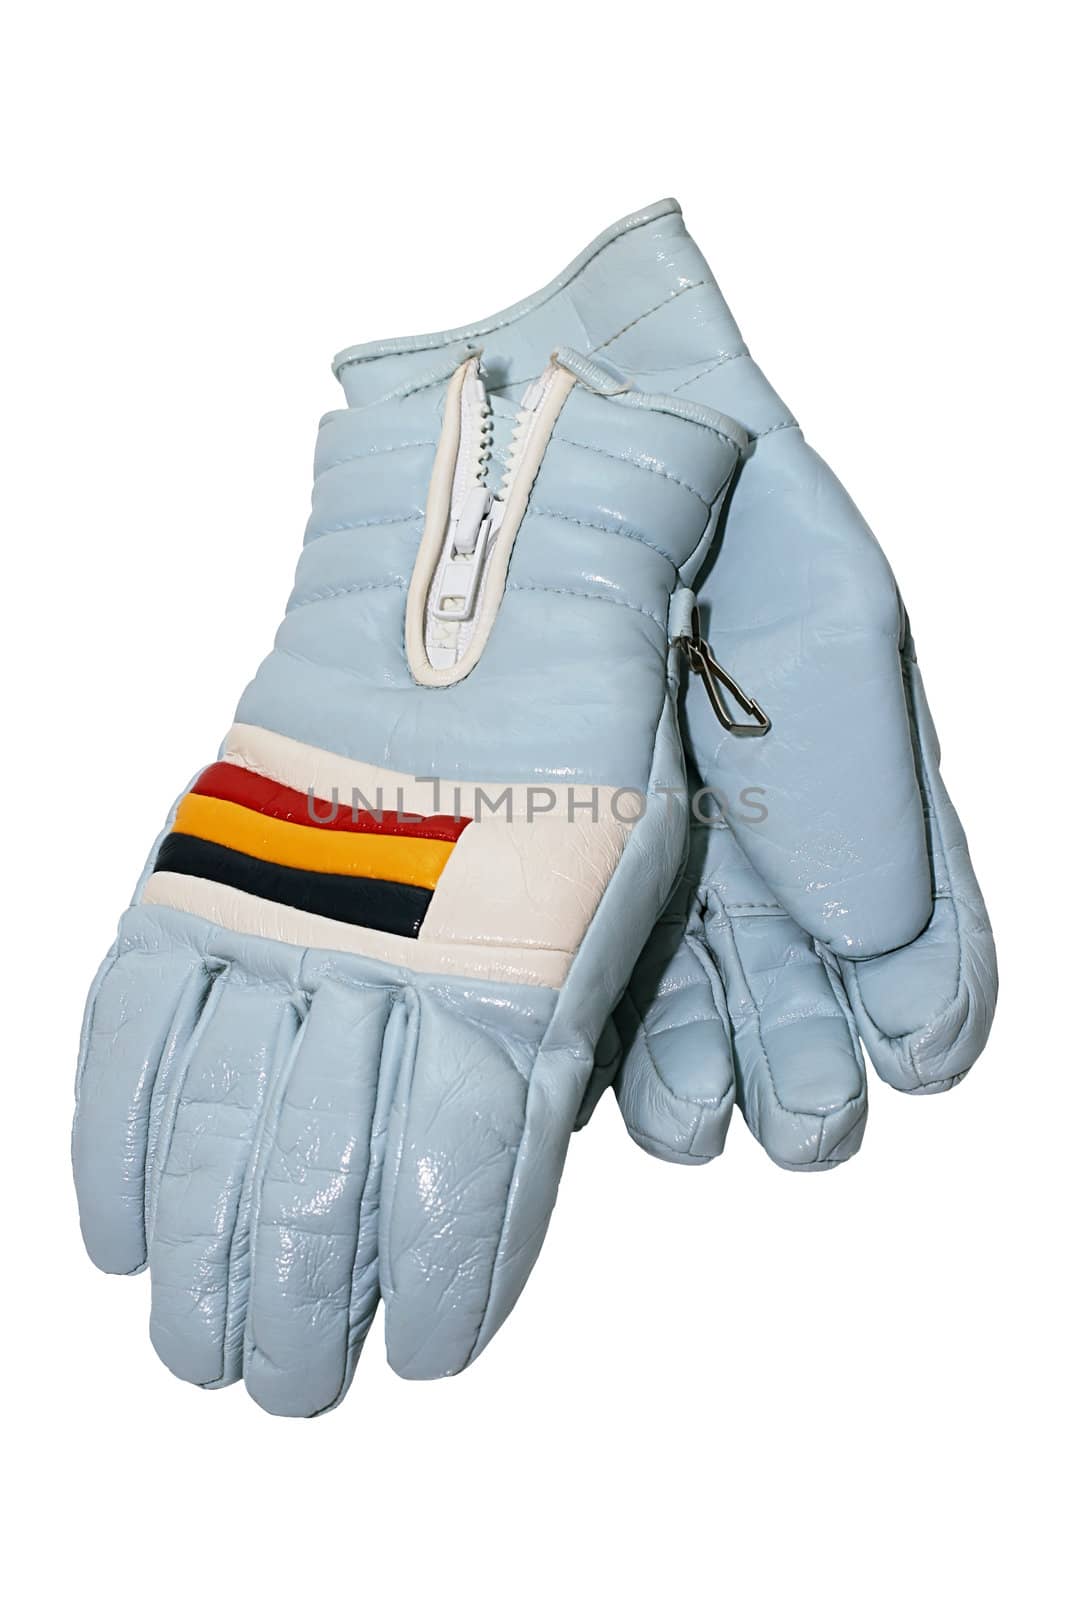 winter gloves by terex